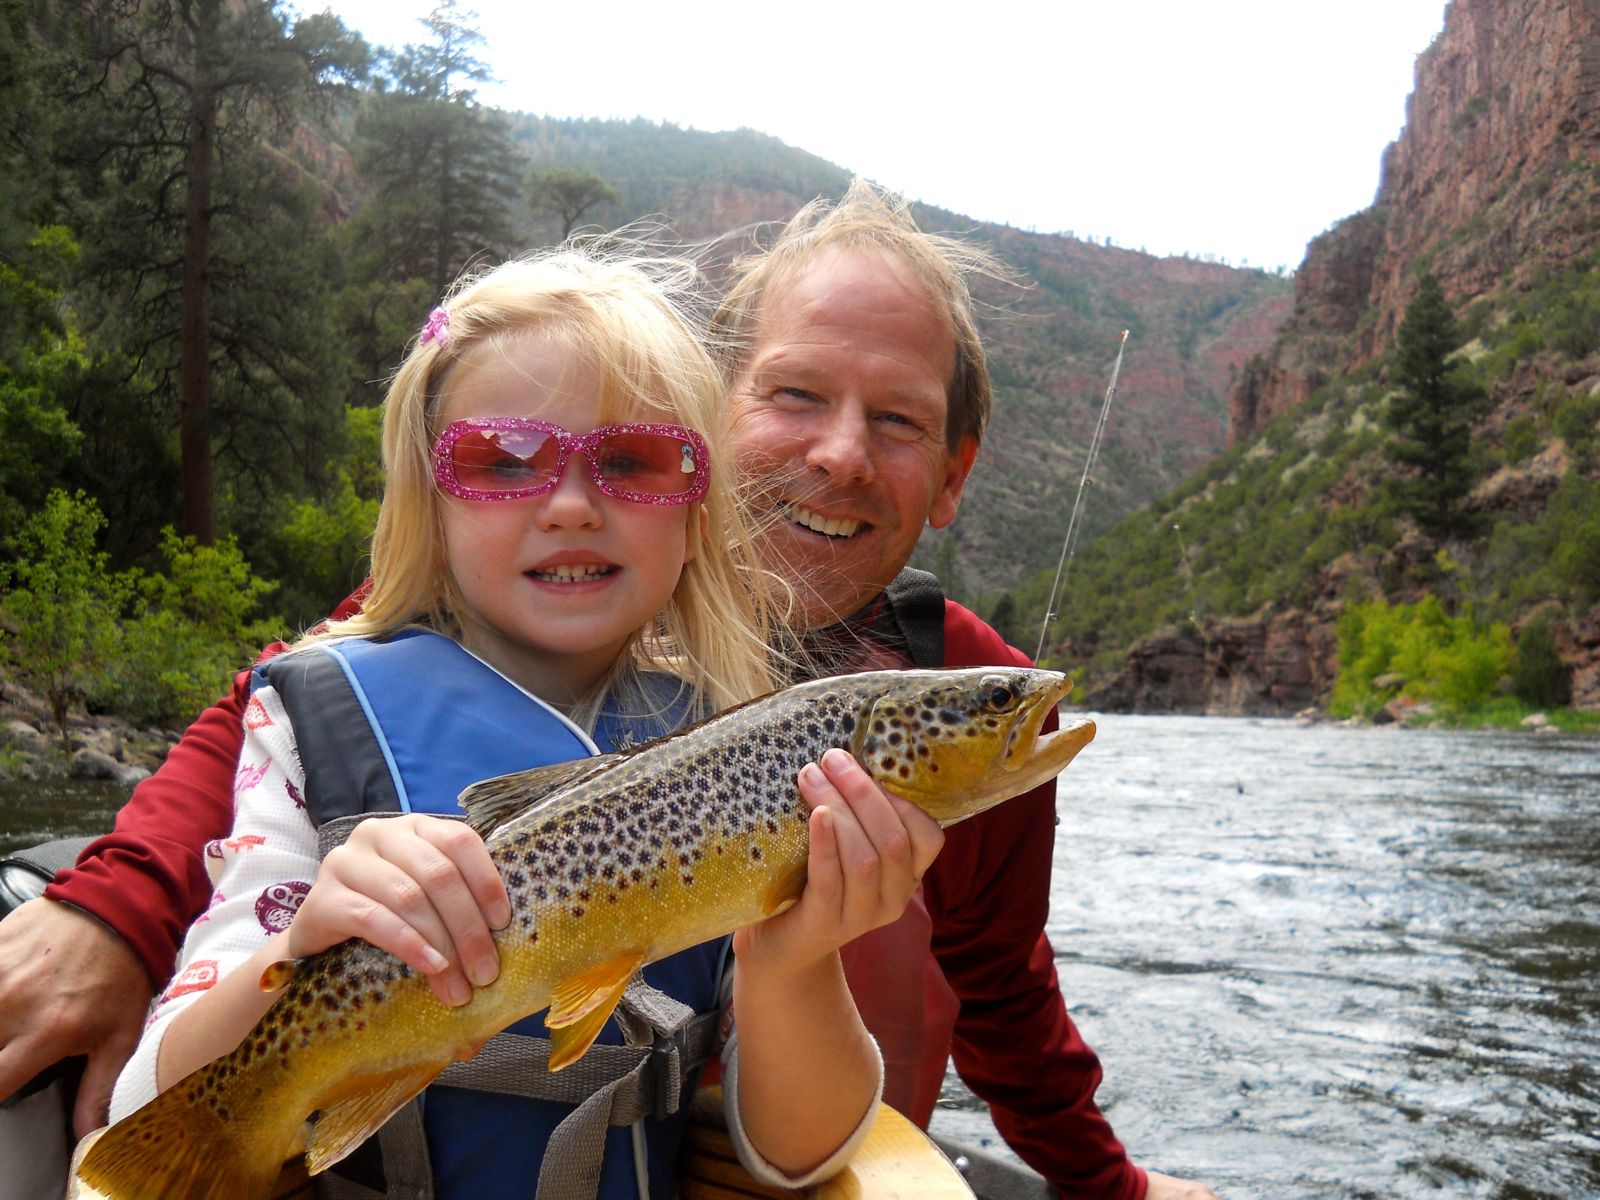 Below the Flaming Gorge Dam, the Green River is one of the finest fly-fishing destinations in the country.